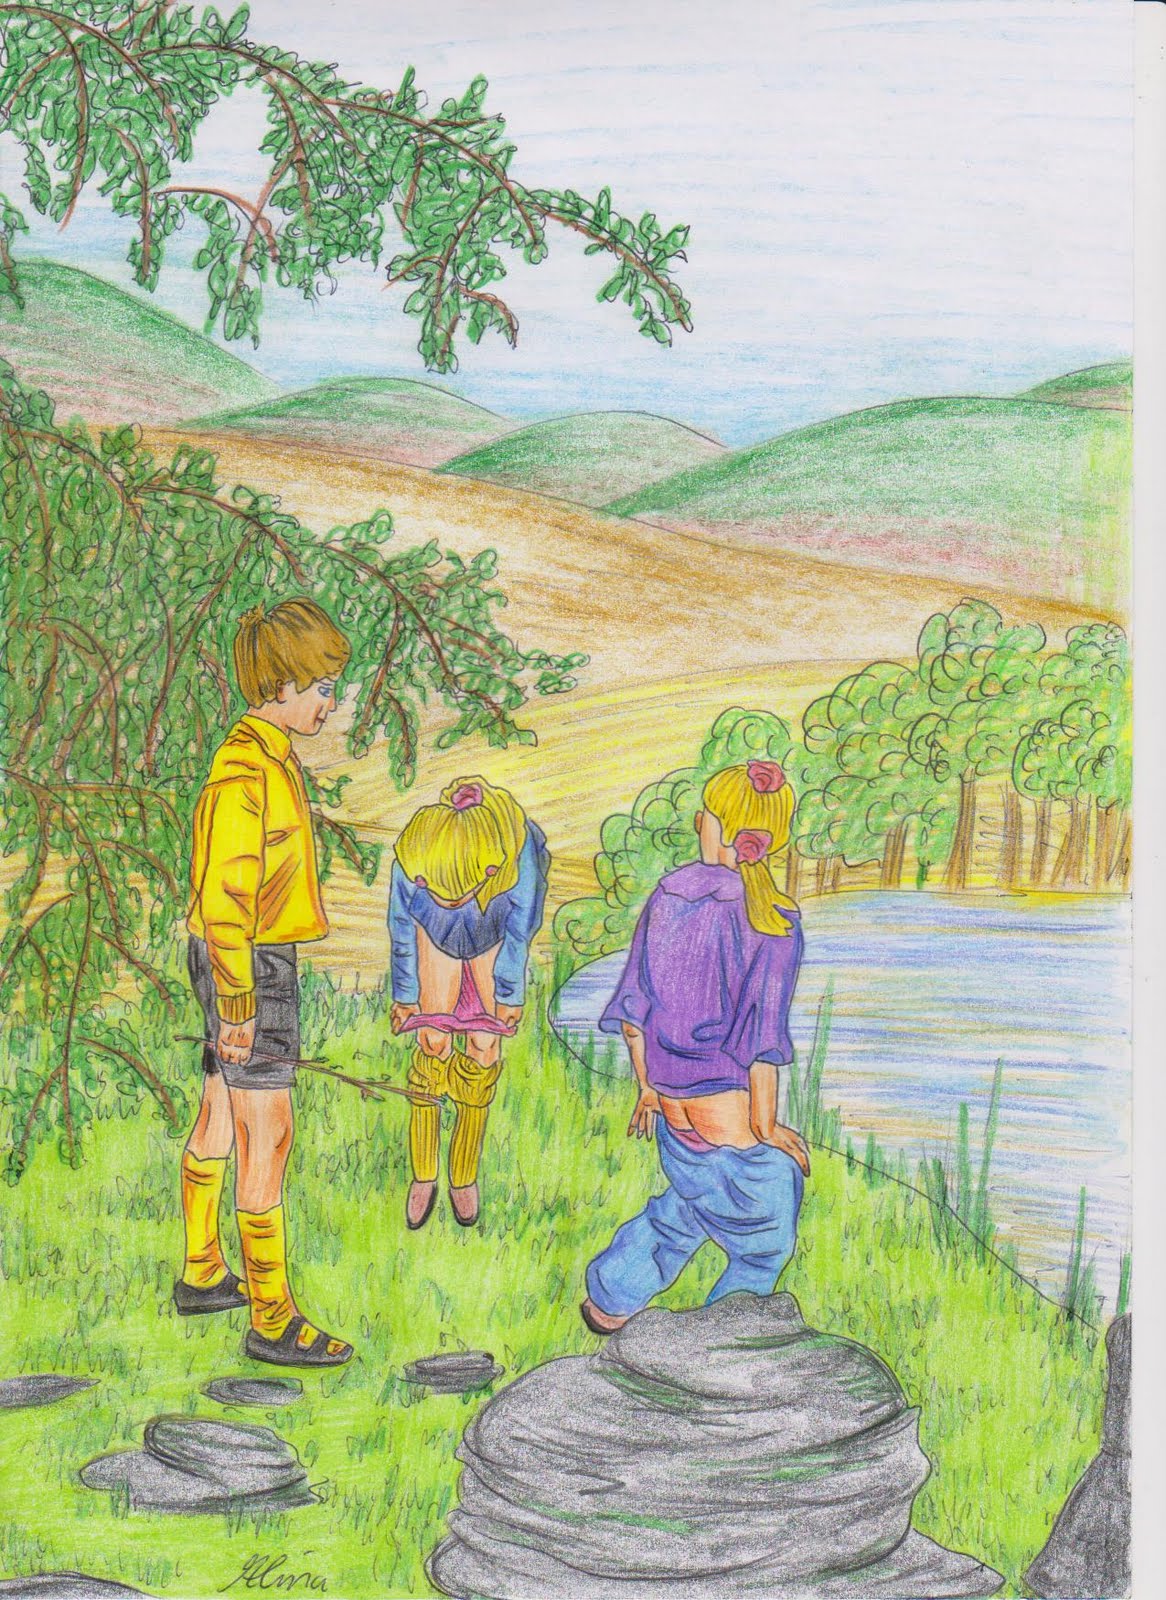 Handprints Spanking Art Stories Page Drawings Gallery Various Artists